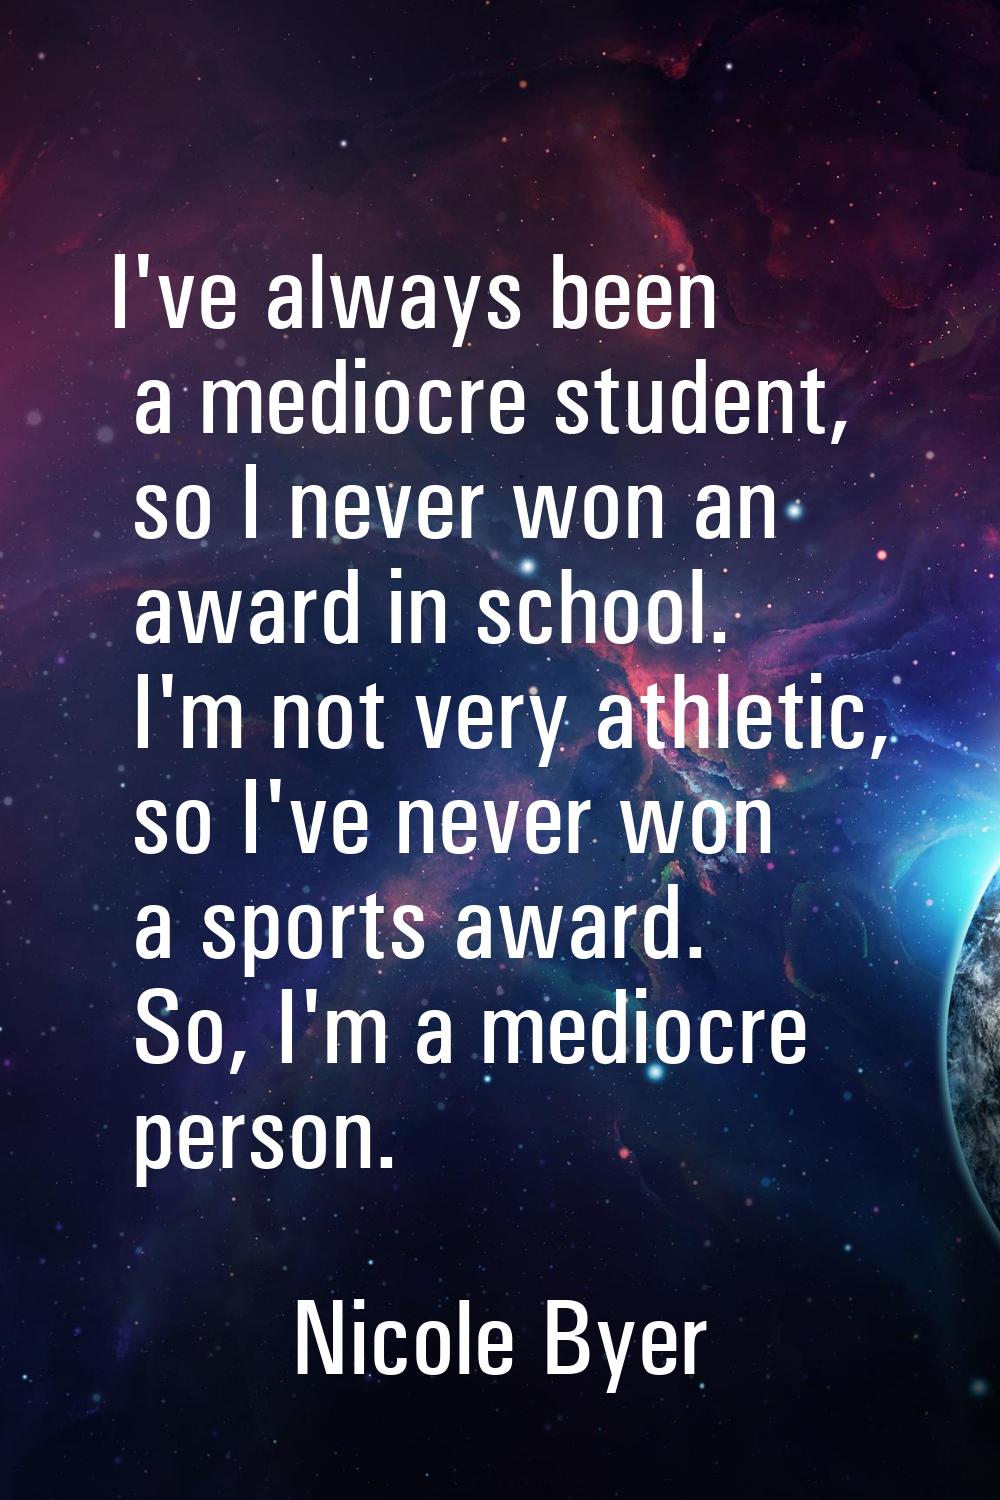 I've always been a mediocre student, so I never won an award in school. I'm not very athletic, so I